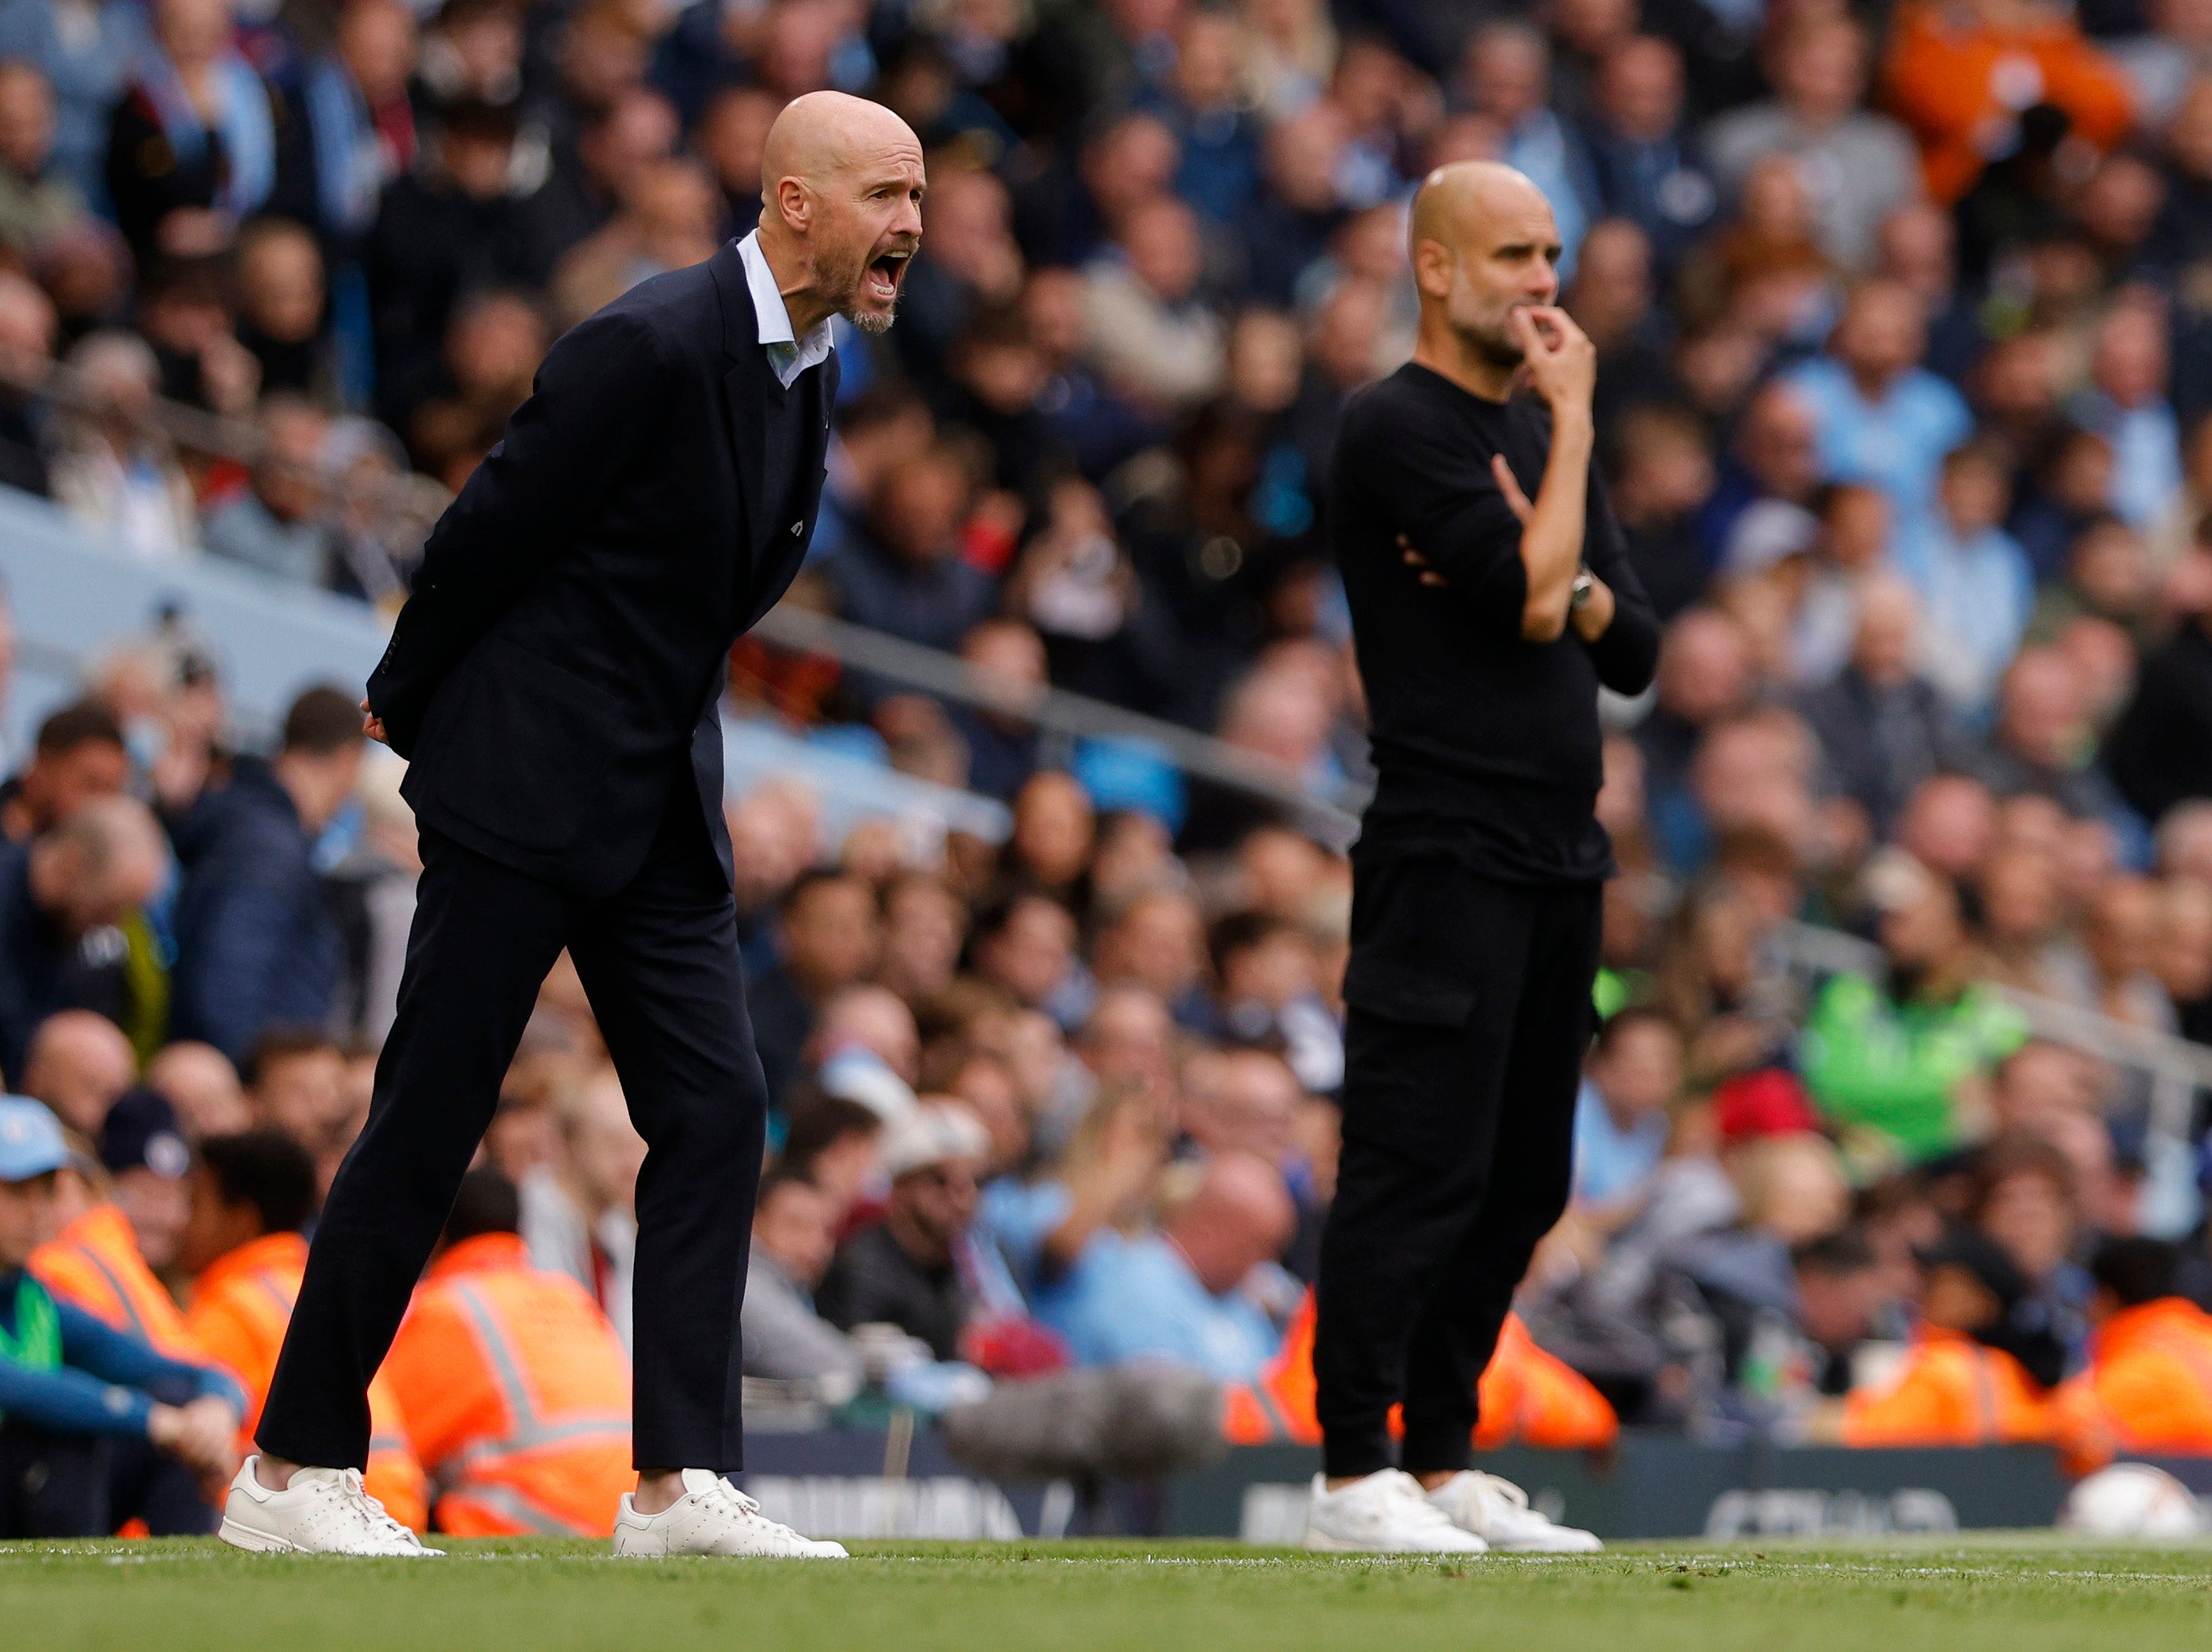 Manchester United manager Erik ten Hag and his Manchester City counterpart Pep Guardiola